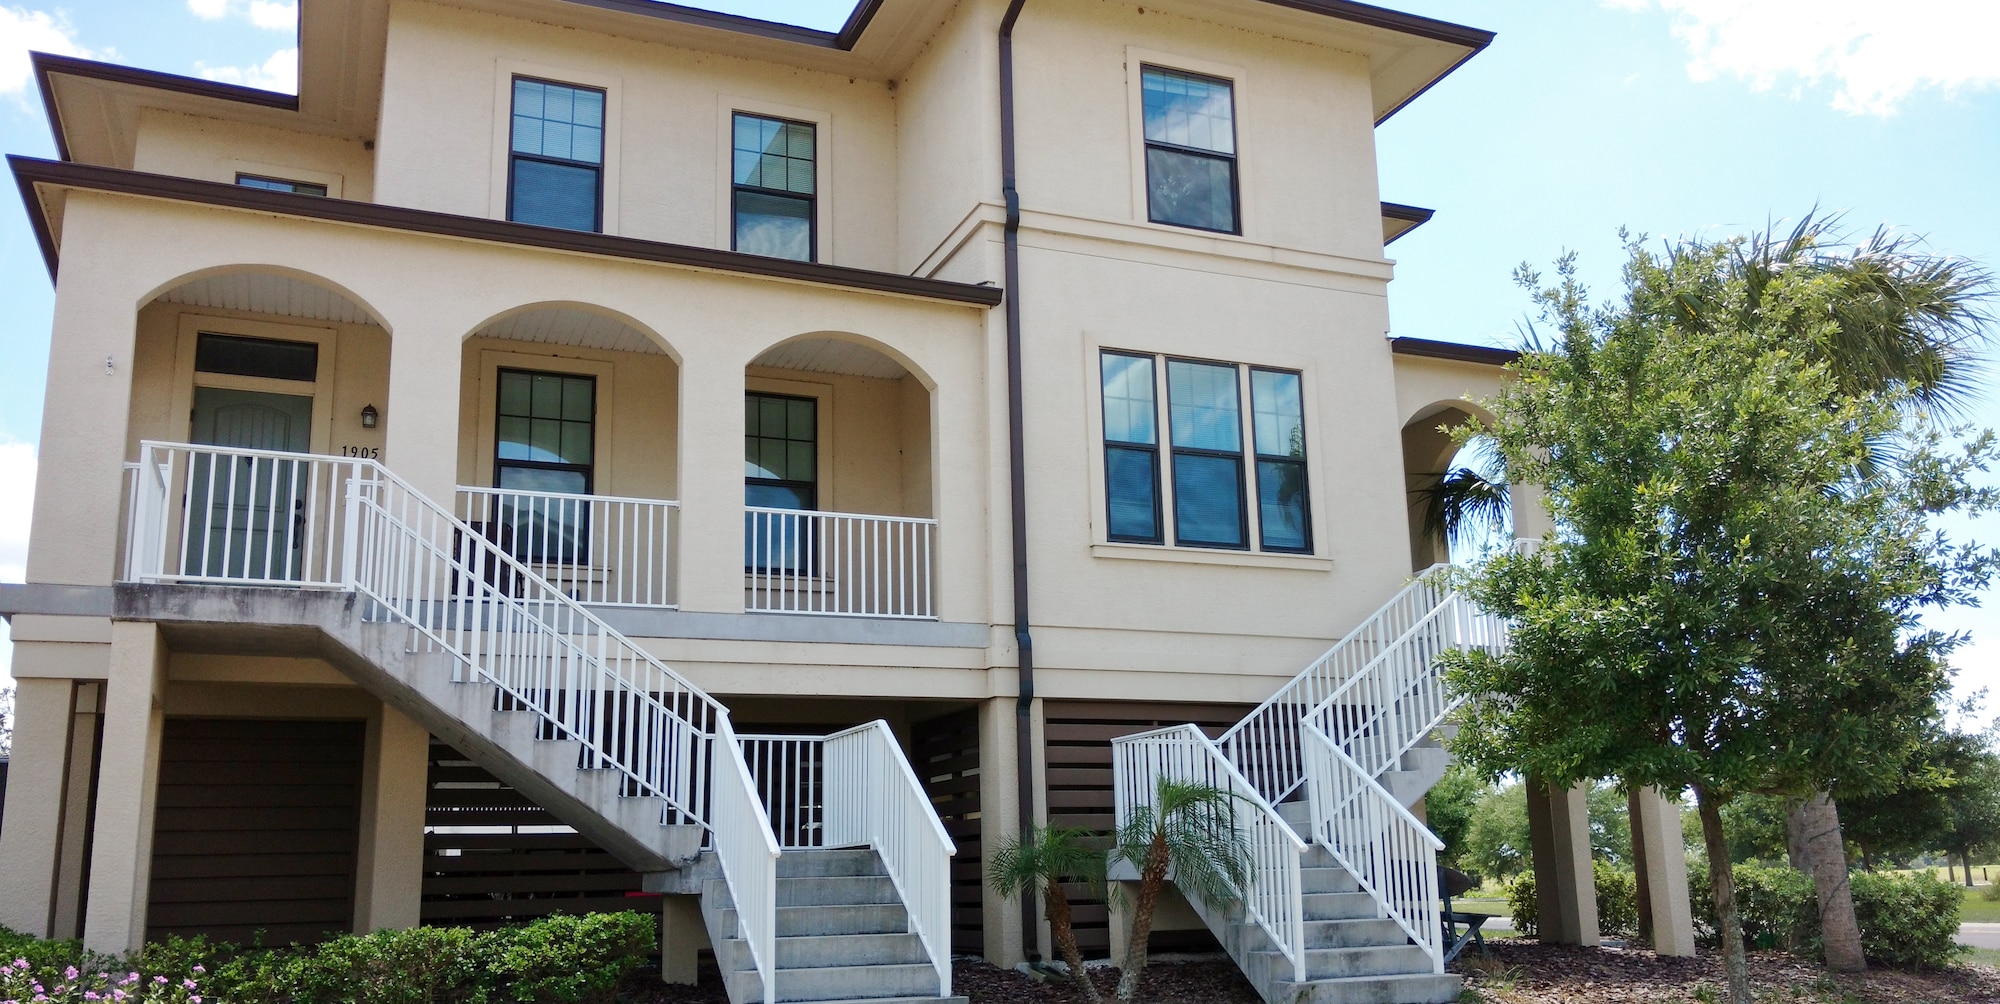 An example of the new homes constructed at MacDill Air Force Base, Florida, after Clark Realty took over ownership, and Harbor Bay the management, in 2007. Constructed in 2011, the duplex in the Freedom Cove neighborhood houses junior non-commissioned officers. The 2,100-square-foot homes include four bedrooms, two-and-a-half bathrooms, a screened in porch, laminate floors and Energy Star-rated appliances.  (Photo courtesy of Nick Leabo/Harbor Bay)